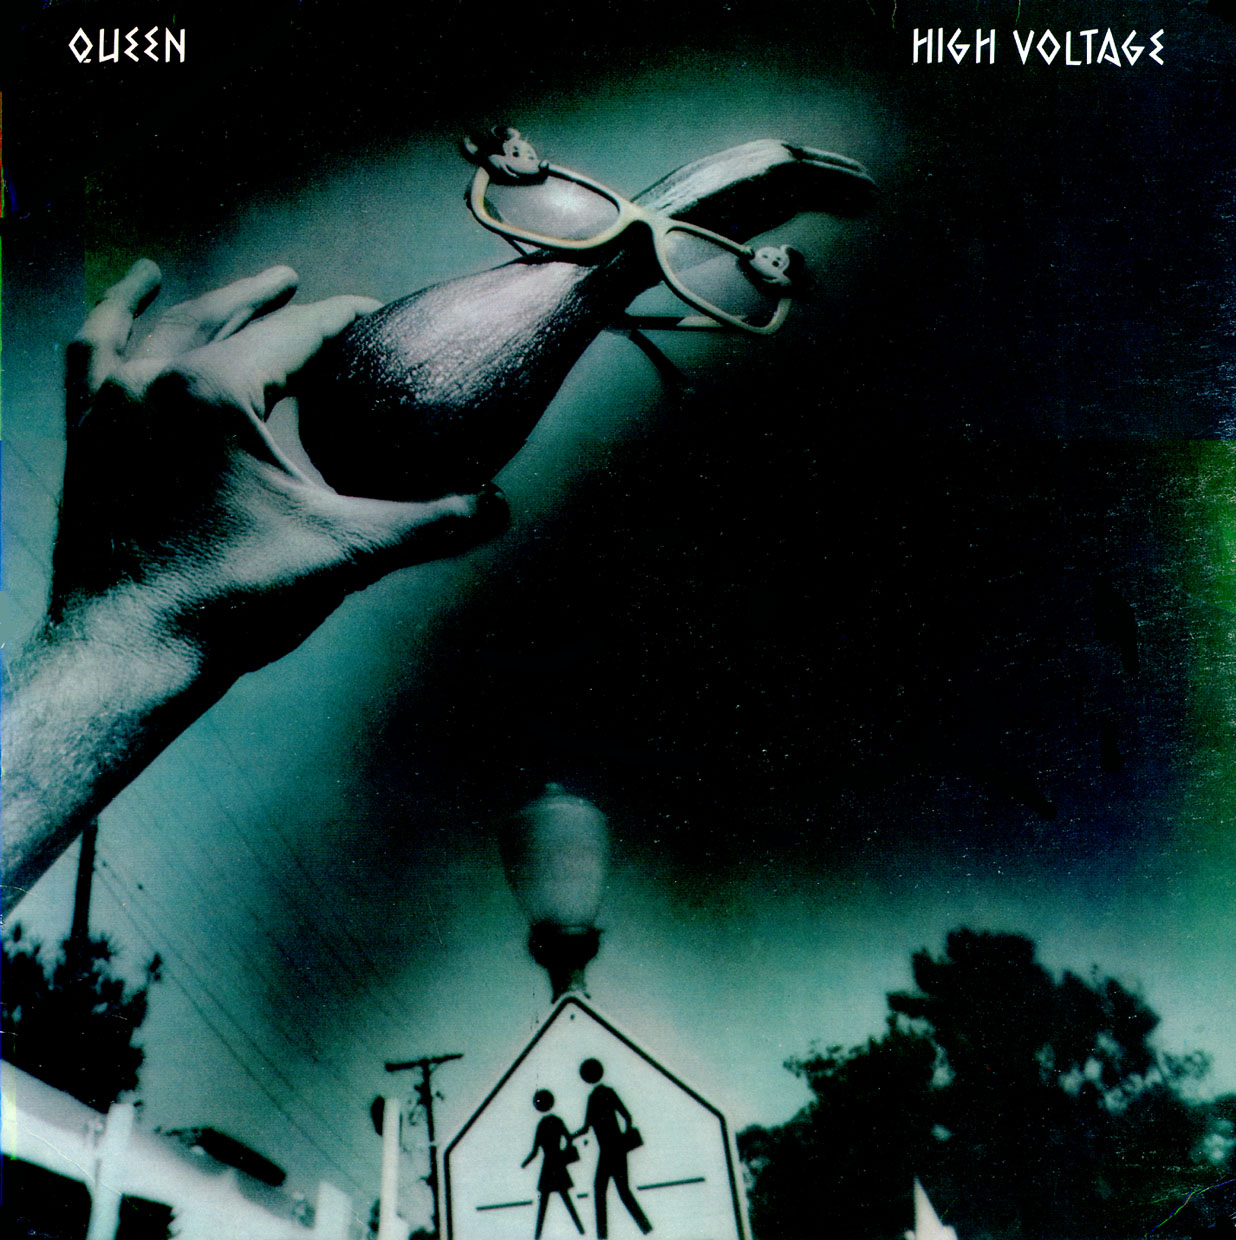 Queen - High Voltage front cover